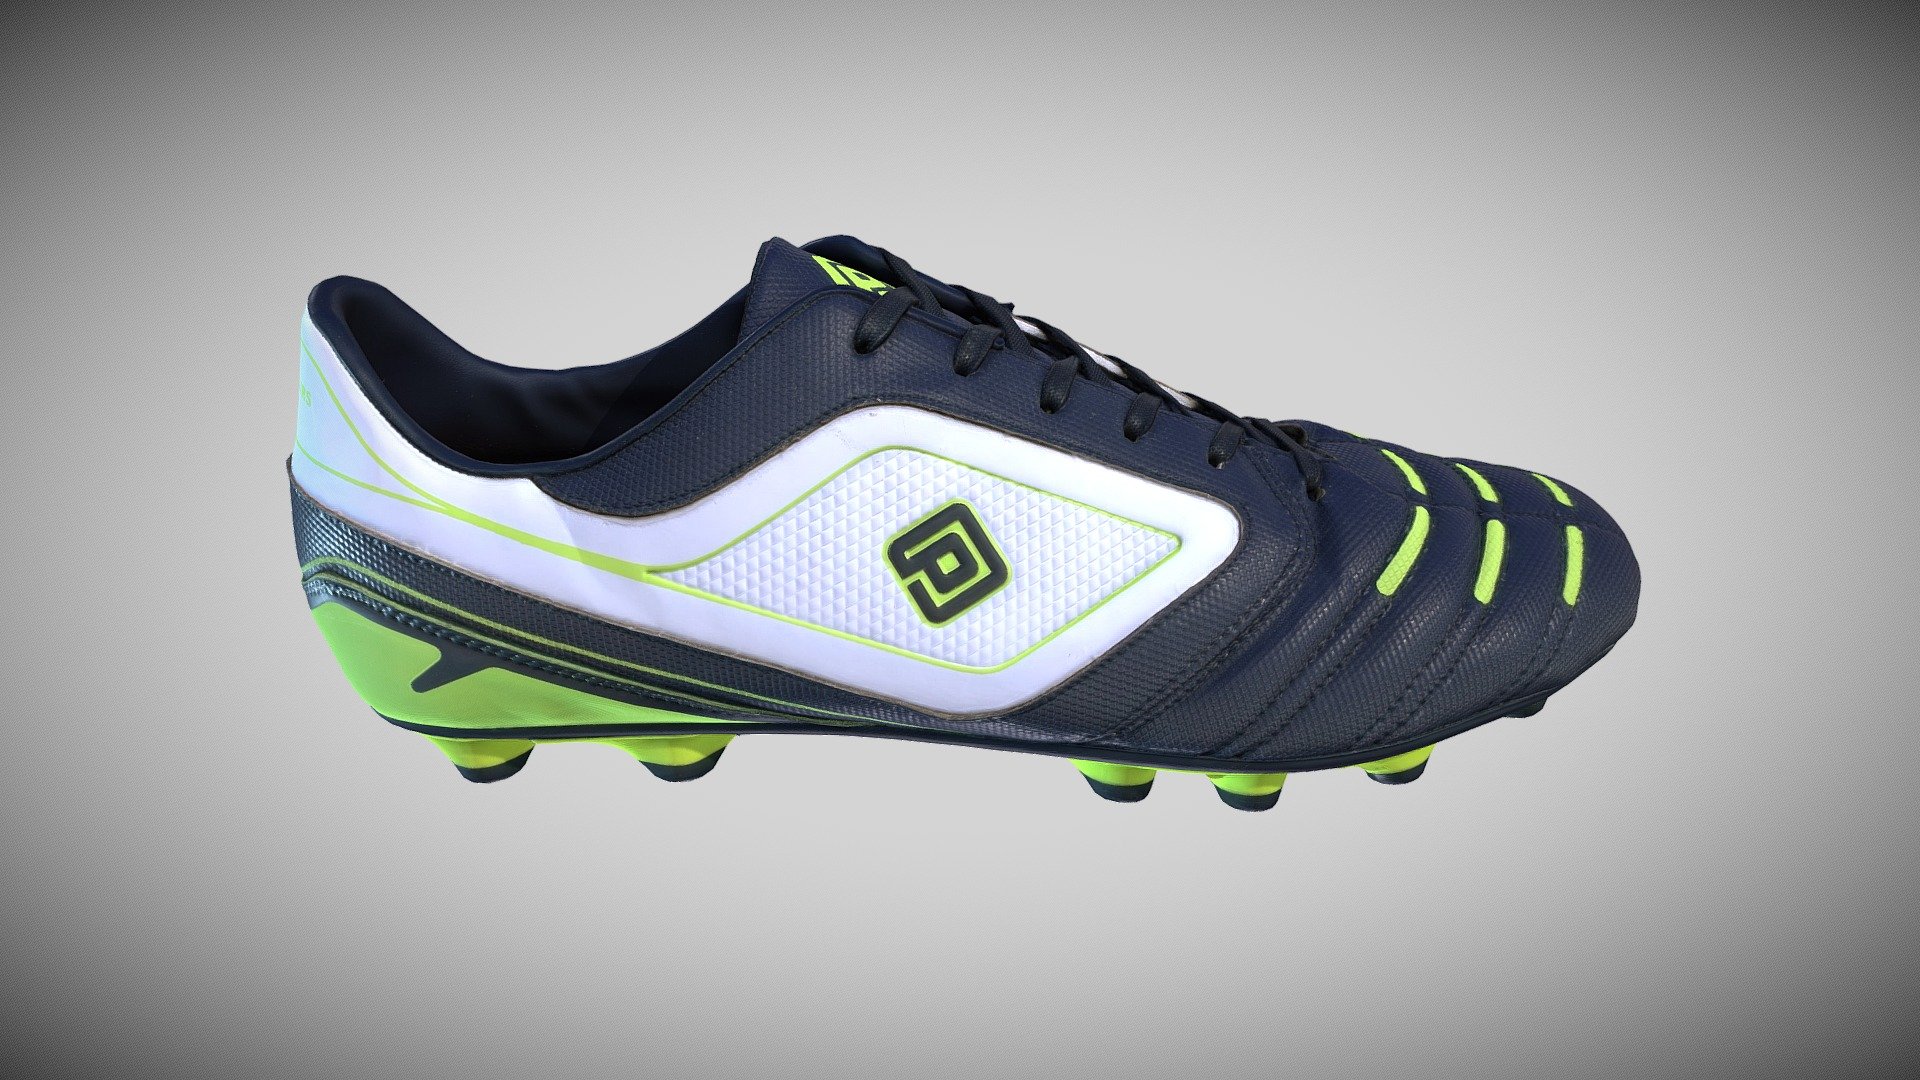 3DScanX - Used Cleat 3D Scan - UltraHD Sample - 3DScanX - Used Cleat 3D Scan - UltraHD Sample - Download Free 3D model by 3DScanX 3d model